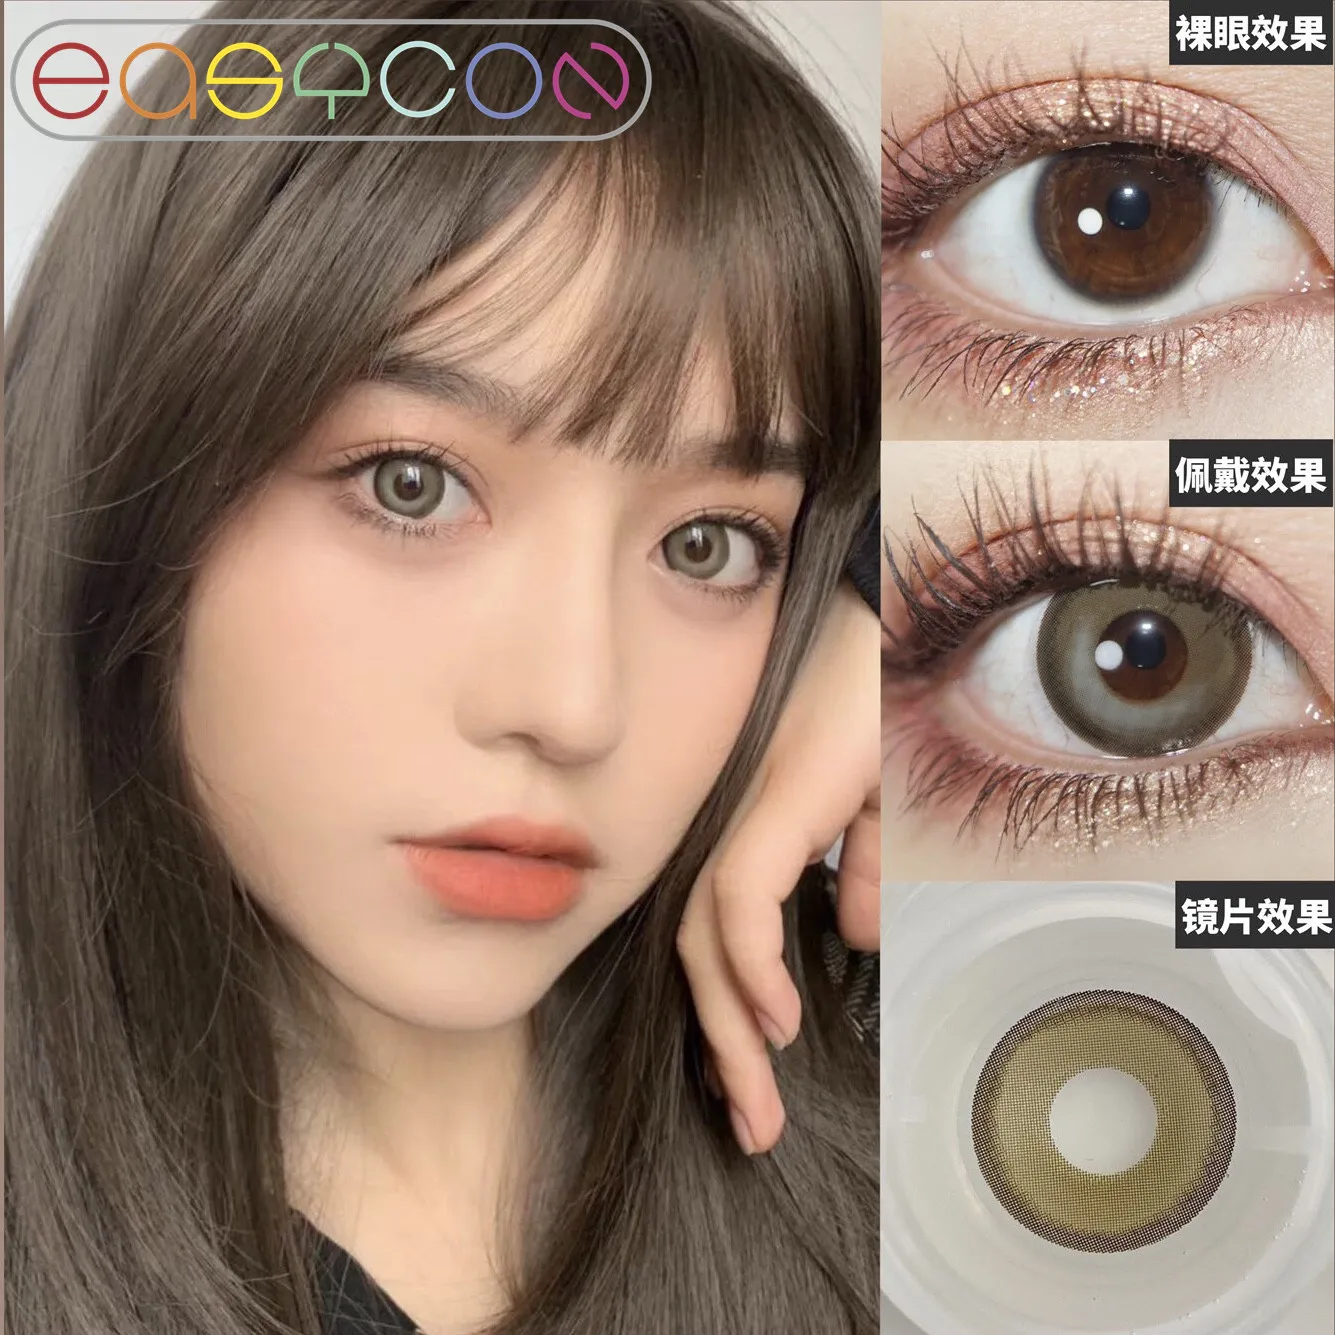 easycon rum pink unique high end soft lens for eyes cosmetic colorful contact lenses makeup big beauty pupil 2pcspair free global shipping